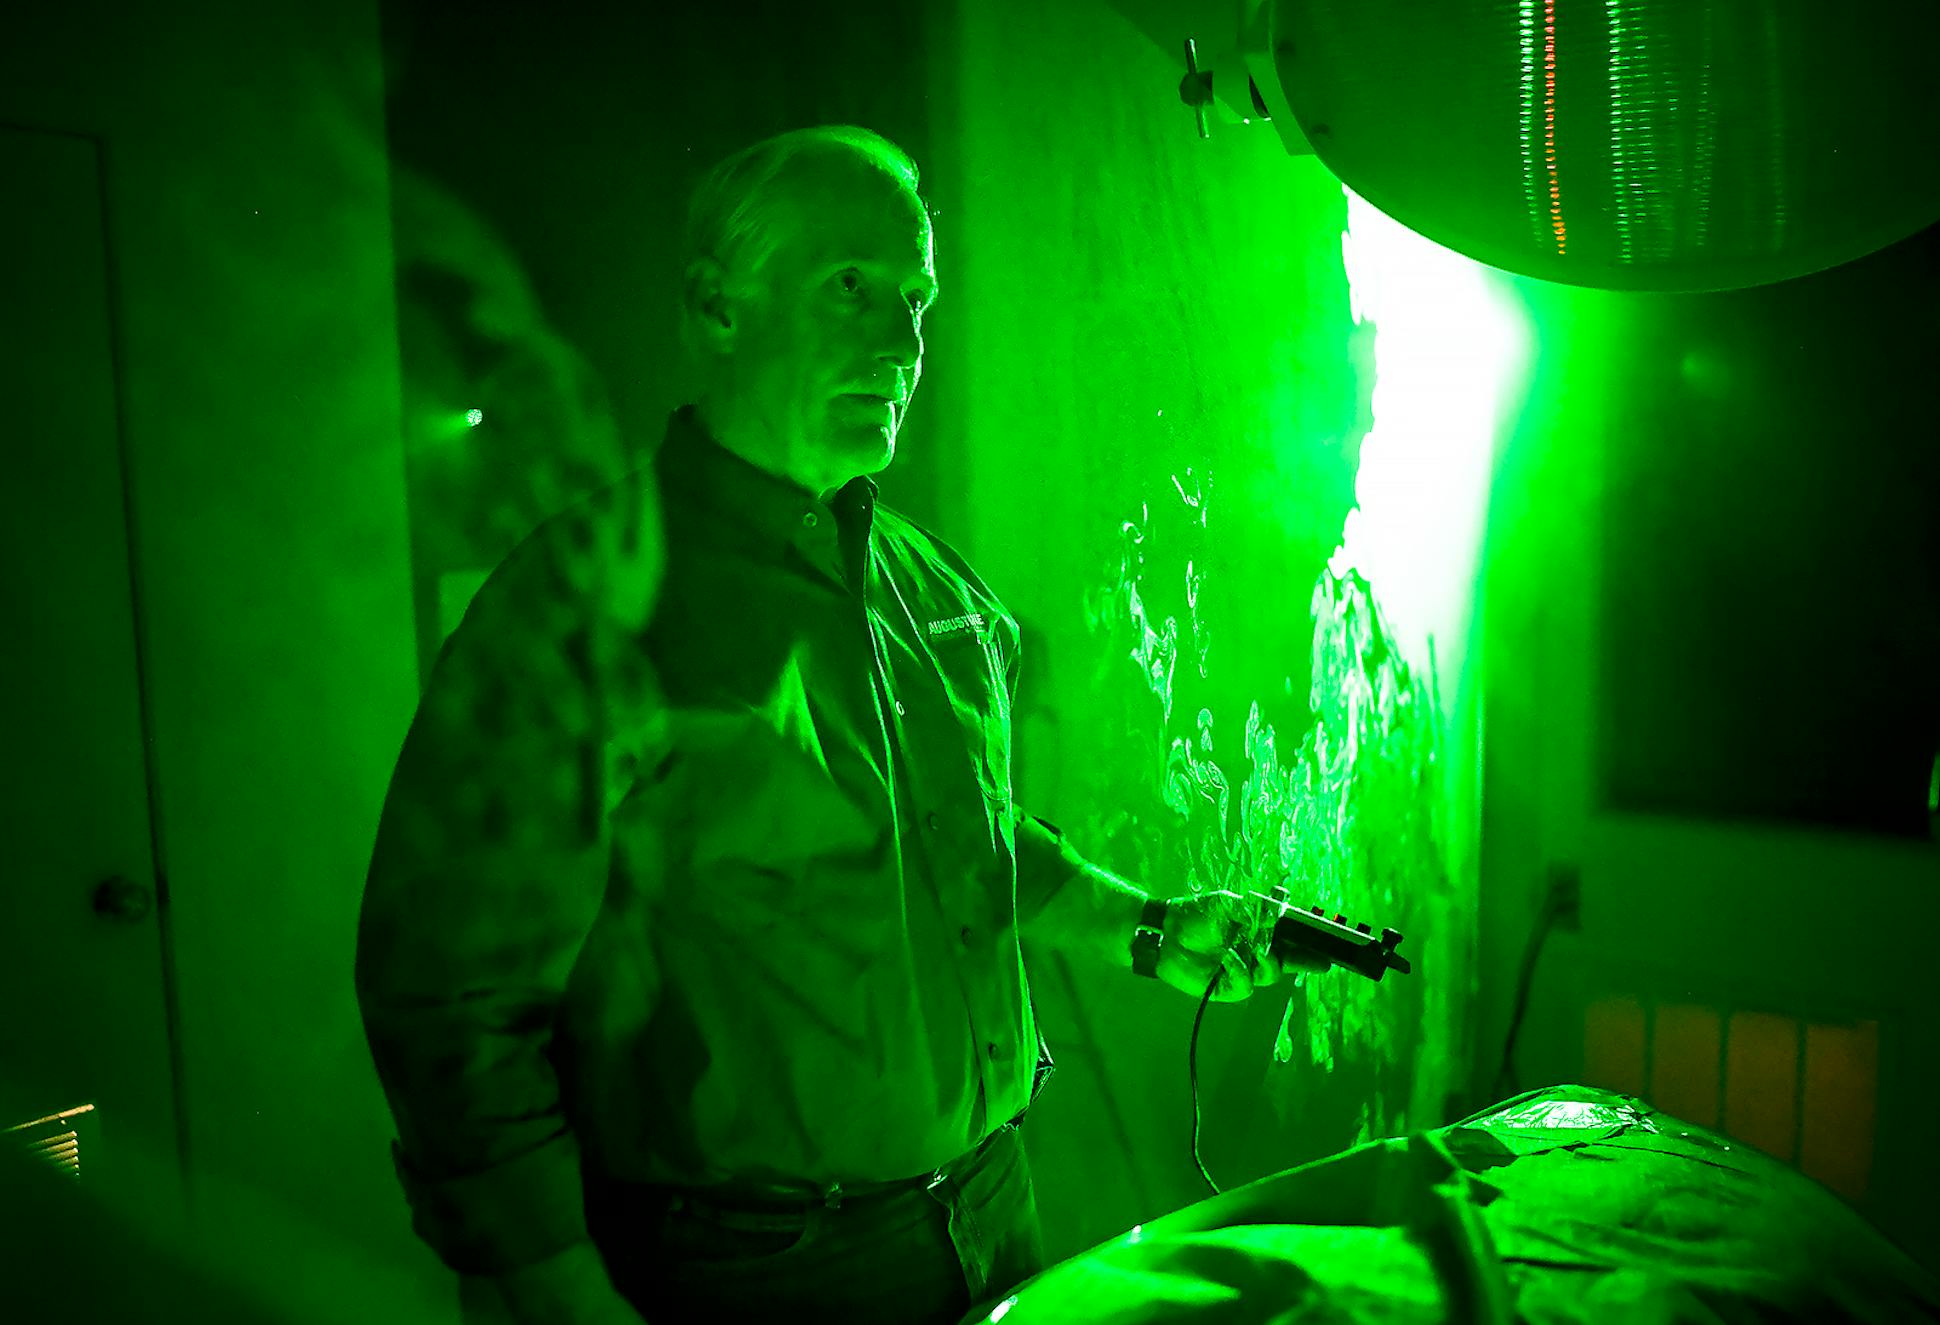 Dr. Scott Augustine gave a demonstration, using a fog machine and a laser to show the upward flow of air caused by the Bair Hugger device which he says contaminates the operating table. 